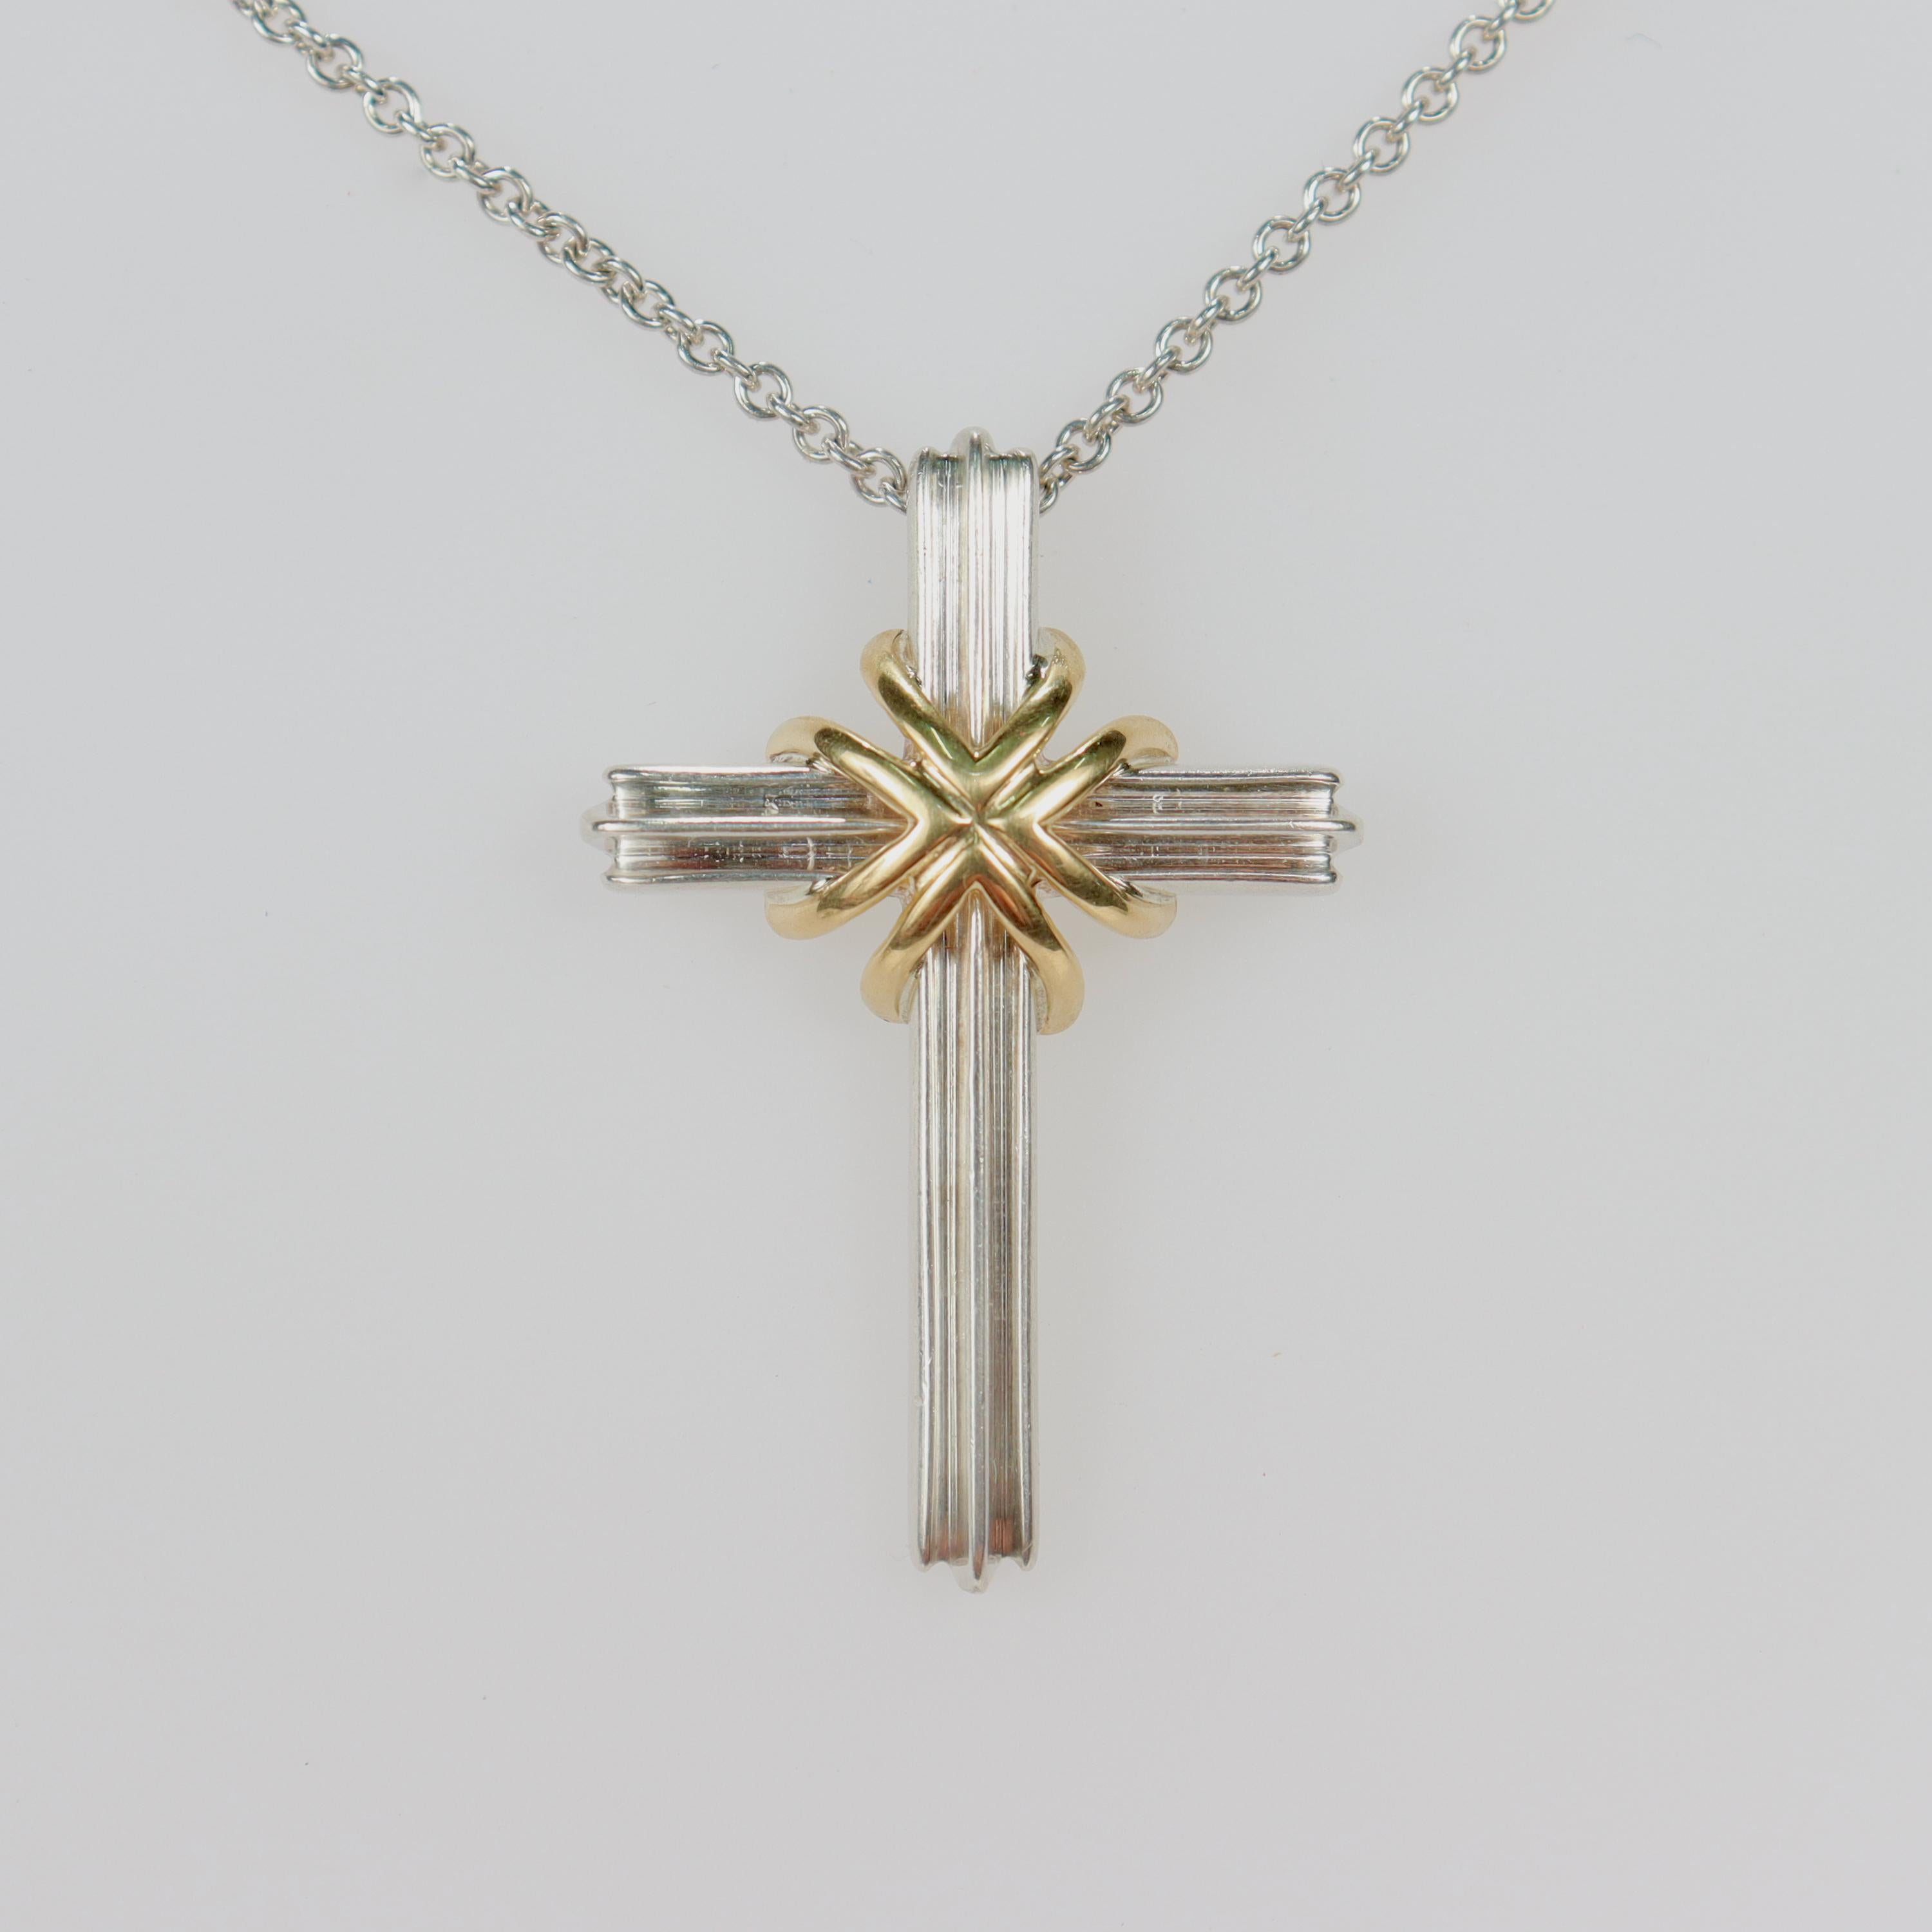 A very fine Tiffany & Co. necklace.

In the form of a cross in sterling silver and 18 karat yellow gold. 

With gold wire wrapped around the center.

Together with a Tiffany sterling silver chain.

Simply wonderful Tiffany & Co. design!

Date:
20th